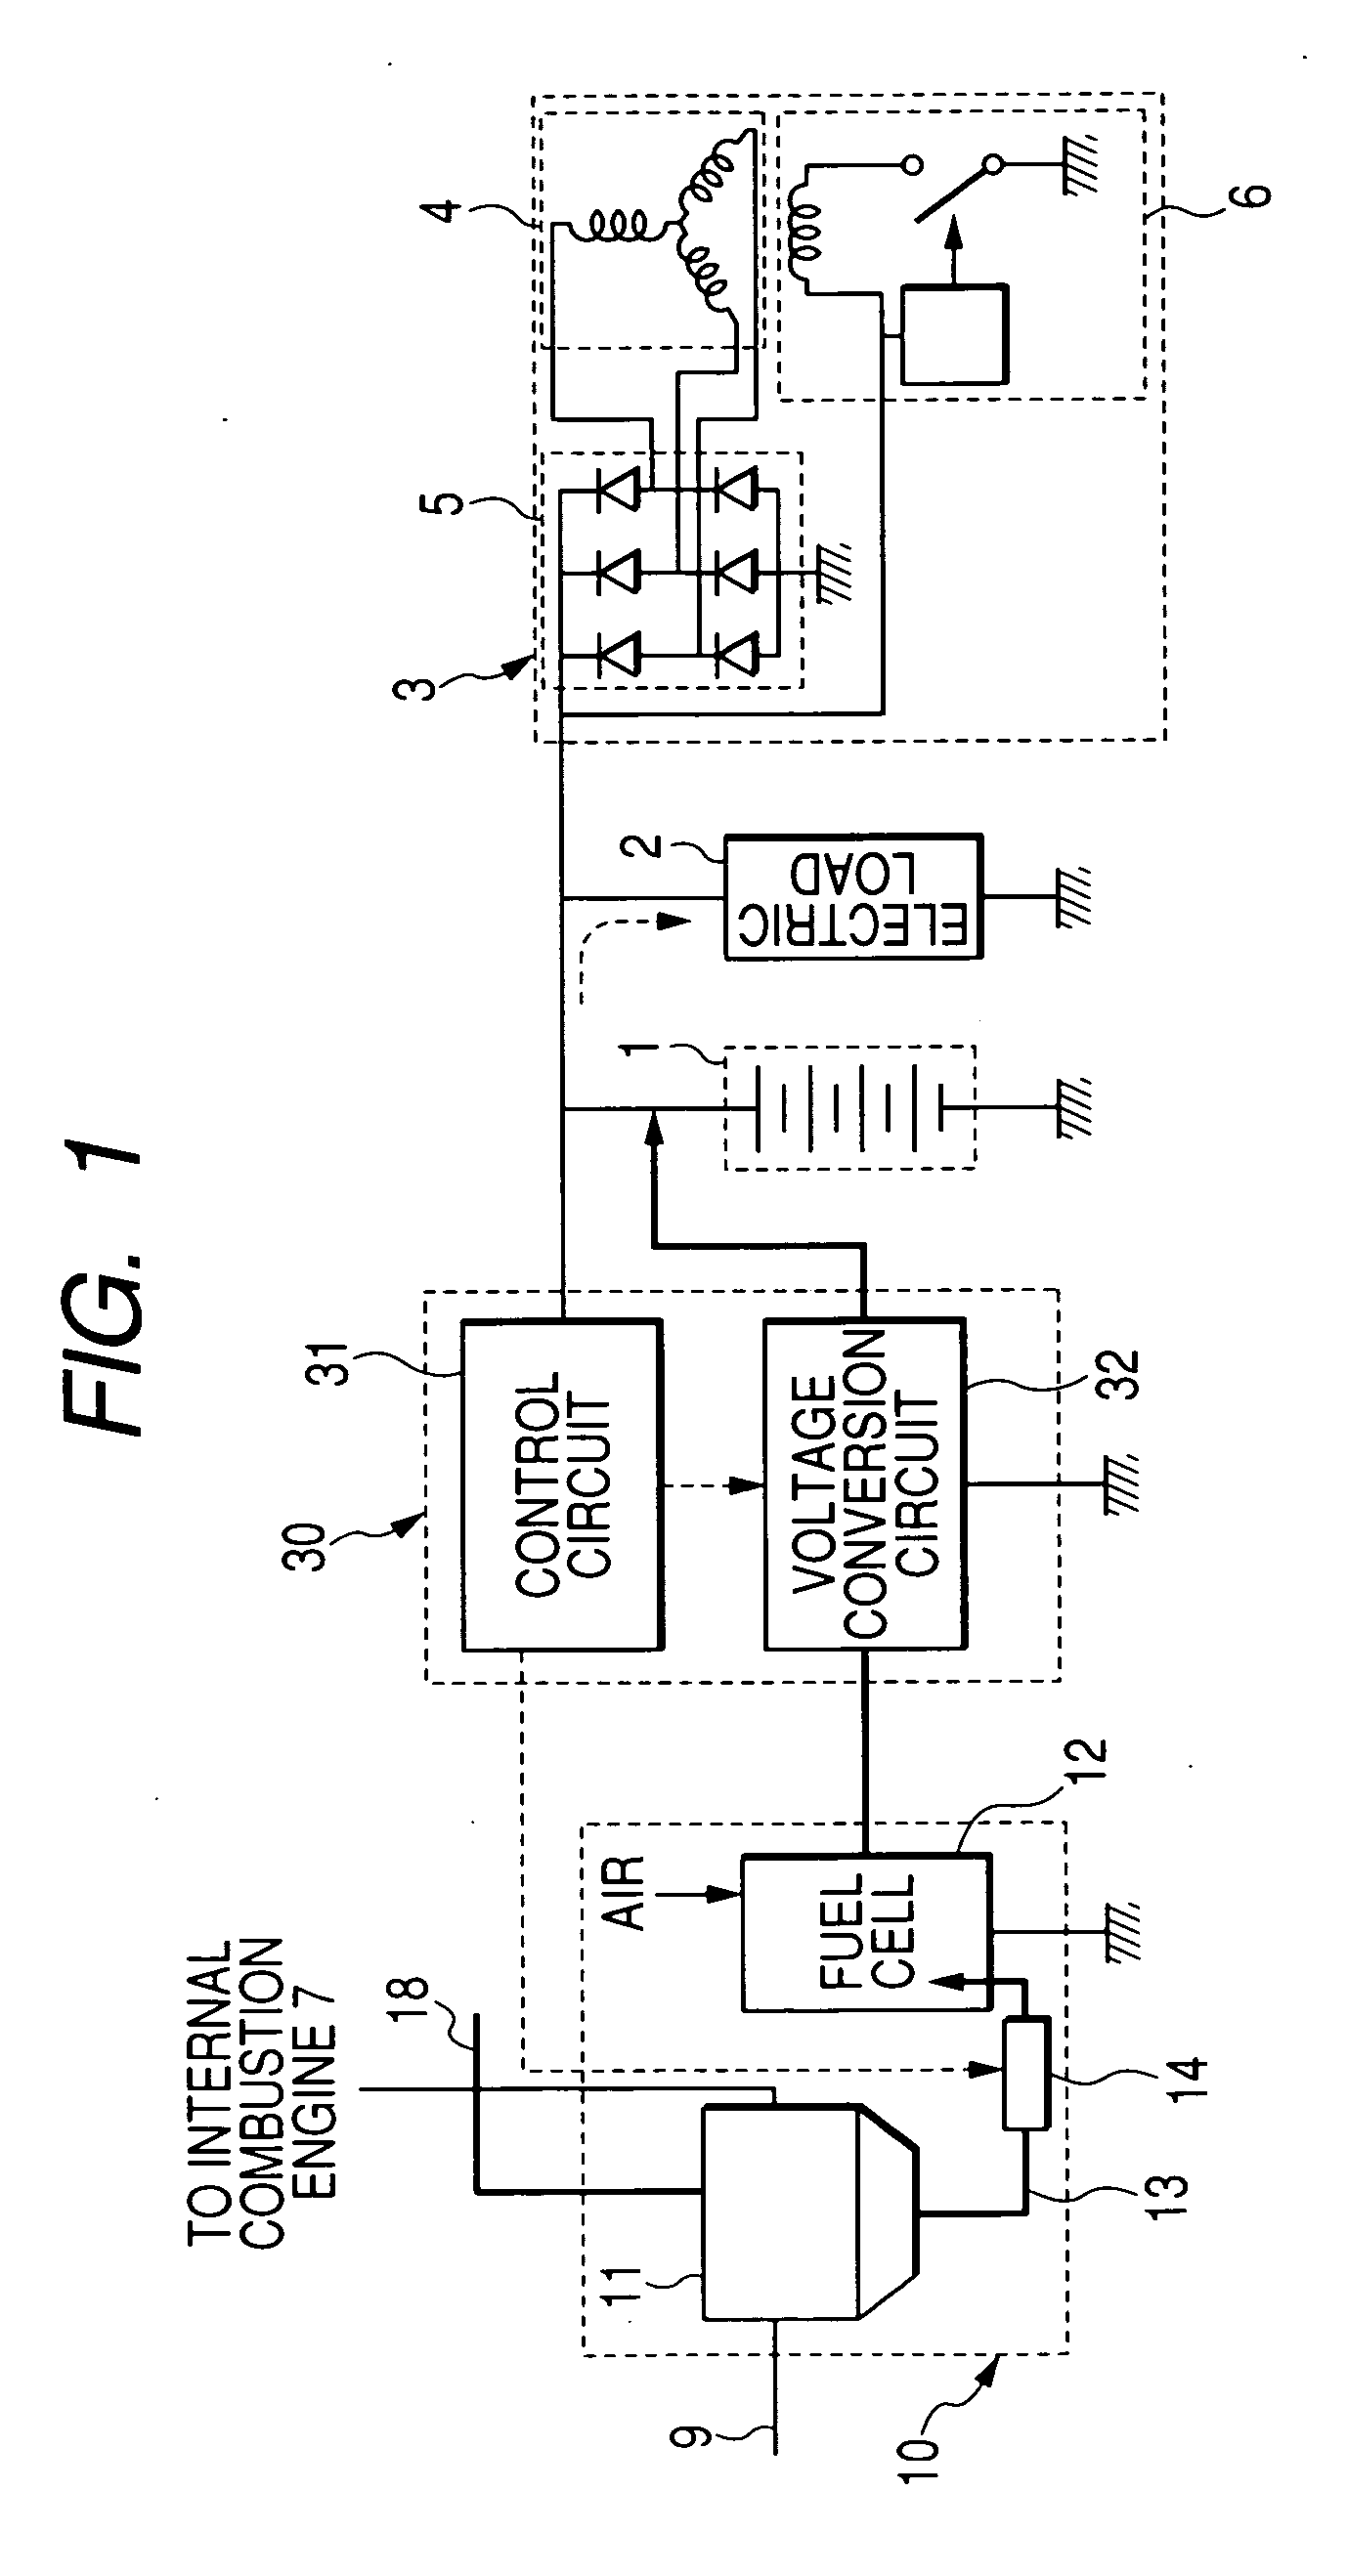 Electric power generation system for vehicle